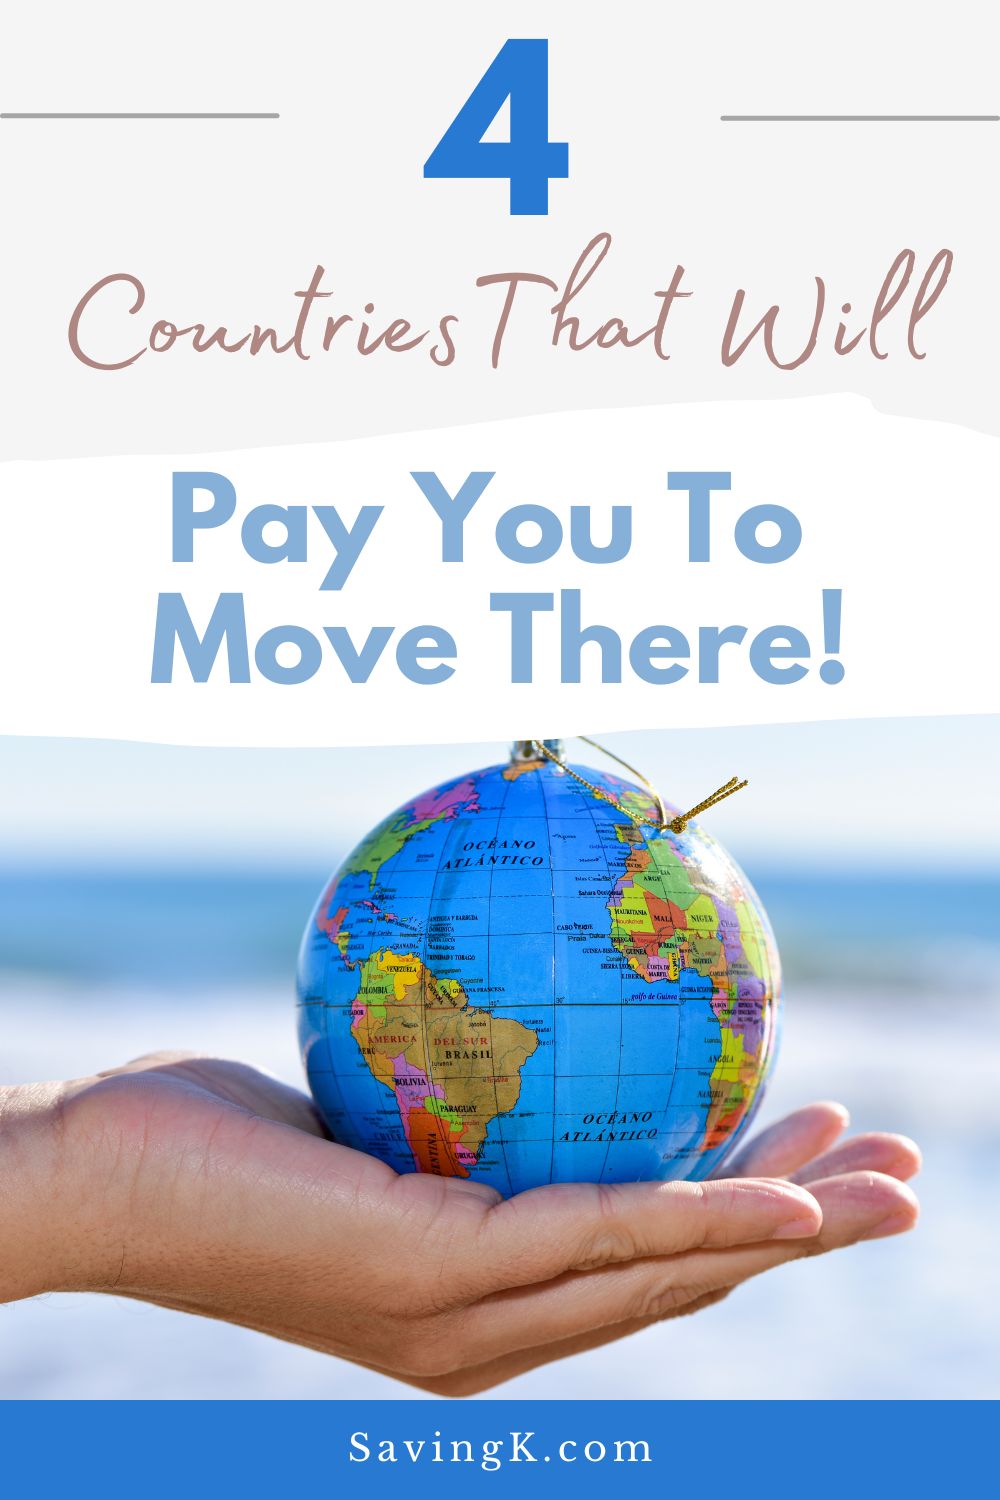 Discover your next adventure: 4 countries offering incentives and will pay you to relocate!